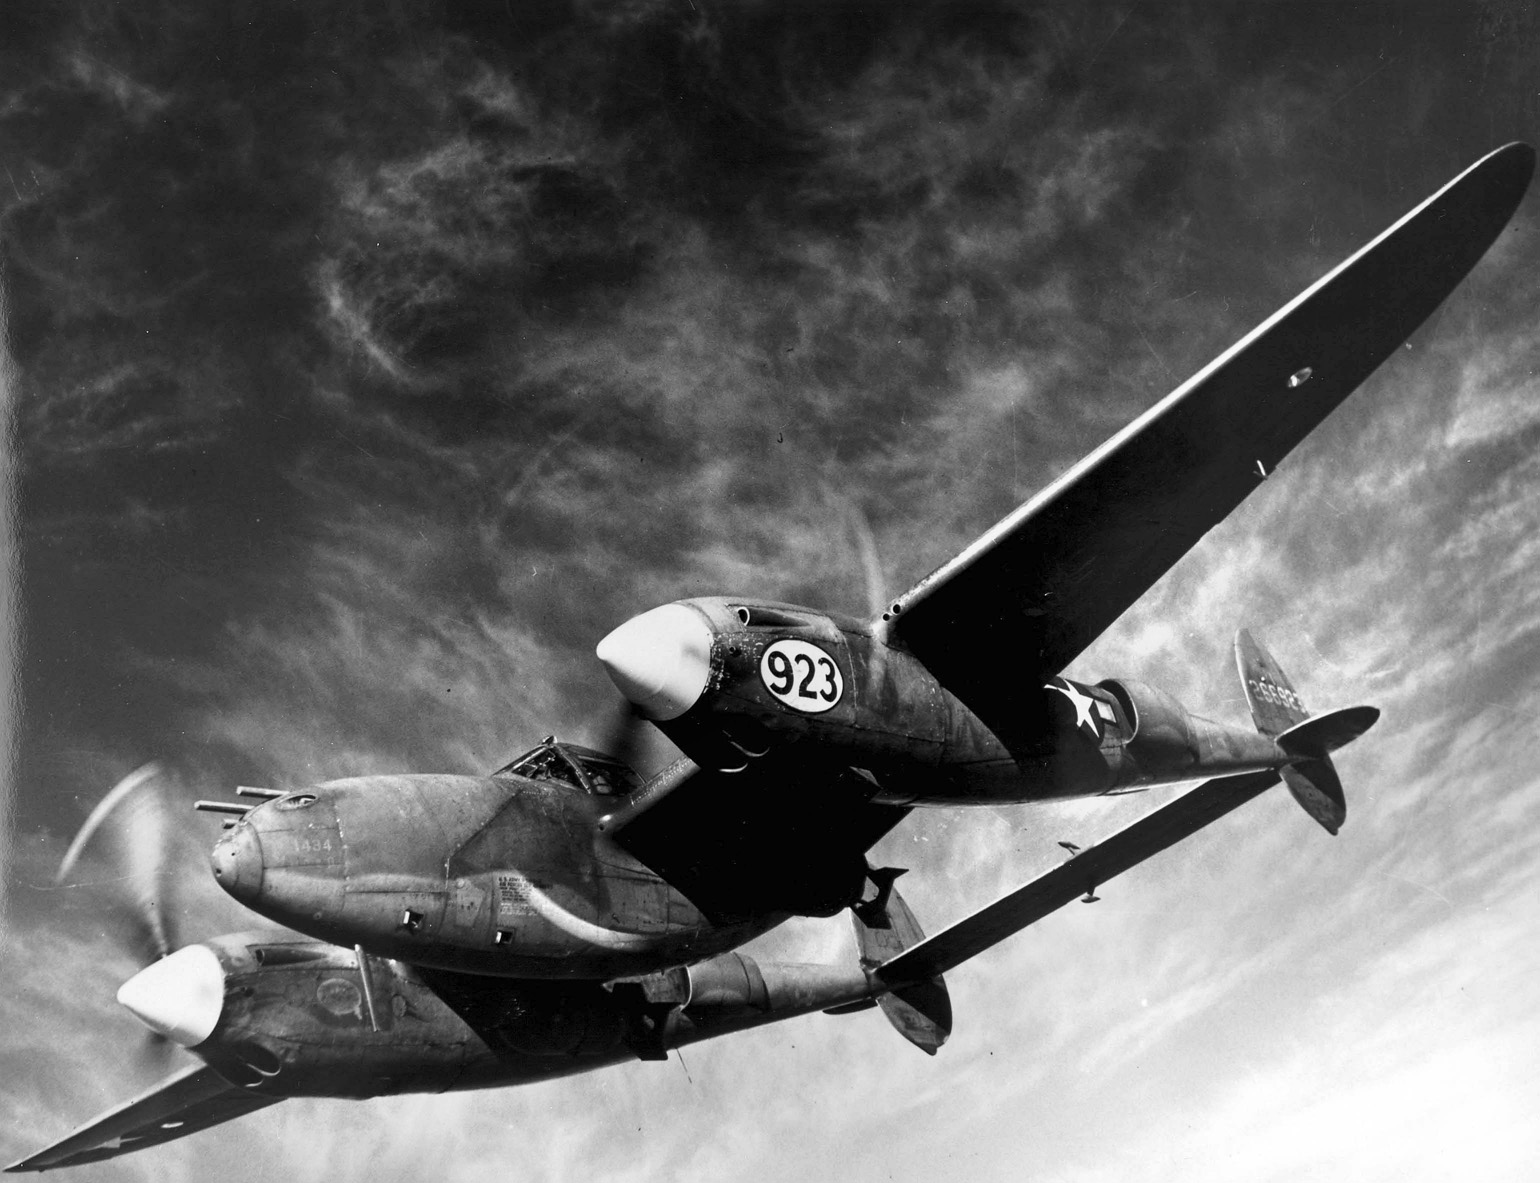 This P-38 Lightning is equipped as a fighter-bomber, with its bomb load beneath each wing. The versatile aircraft was capable as a dog fighter and reconnaissance aircraft, as well. 